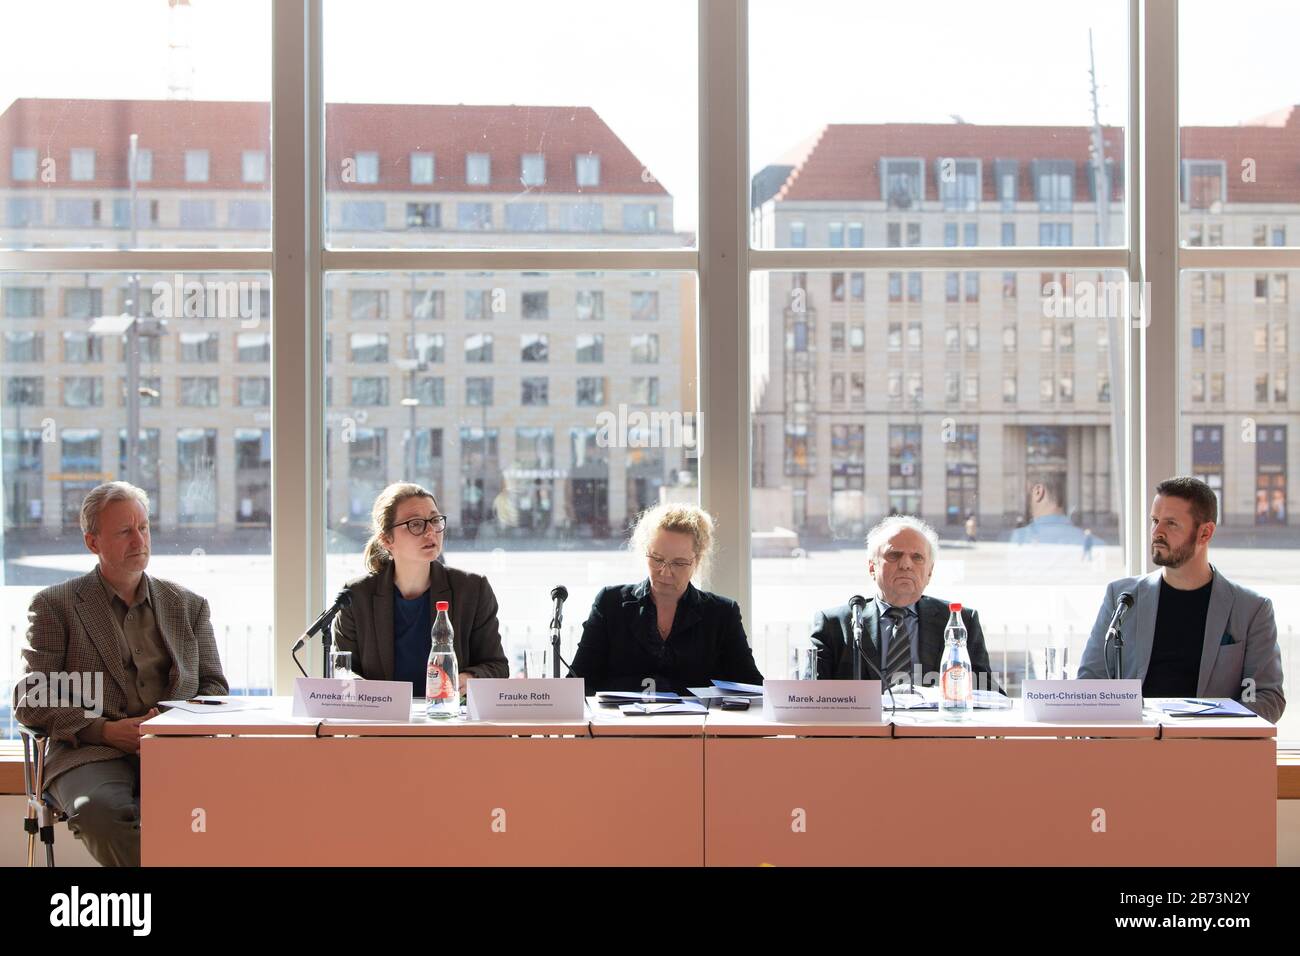 Dresden, Germany. 13th Mar, 2020. Arend Flemming (l-r), Director of the Dresden Municipal Libraries, Annekatrin Klepsch (Die Linke), Mayor for Culture and Tourism, Frauke Roth, Director of the Dresden Philharmonic, Marek Janowski, Principal Conductor, and Robert-Christian Schuster, Orchestra Director, sit next to each other at a press conference in the Kulturpalast. Due to the coronavirus, the Dresden Philharmonic is cancelling all events in the concert hall of the Dresden Palace of Culture. Credit: Sebastian Kahnert/dpa-Zentralbild/dpa/Alamy Live News Stock Photo